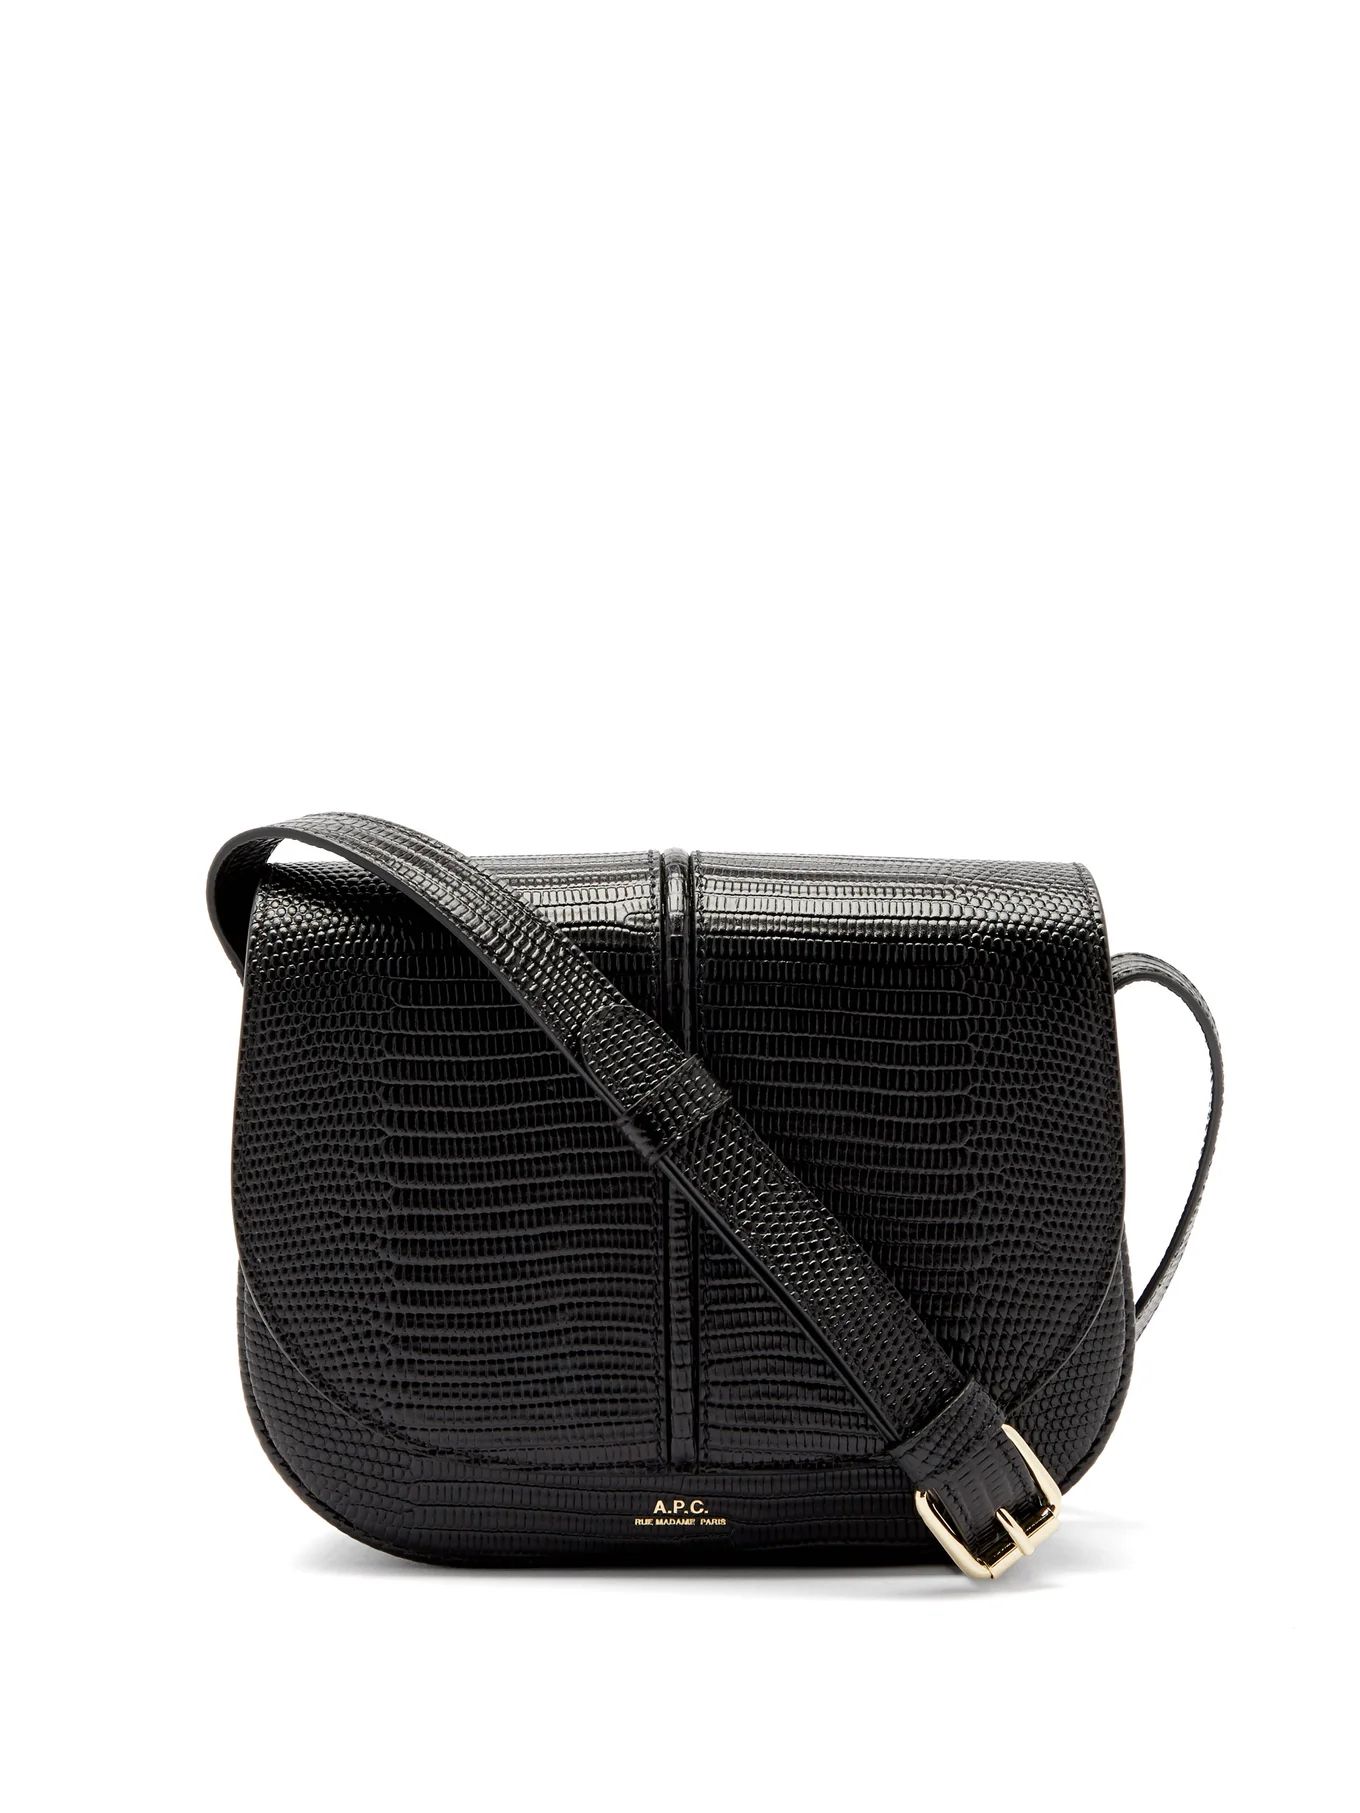 A.P.C.Betty lizard-effect leather cross-body bag | Matches (US)